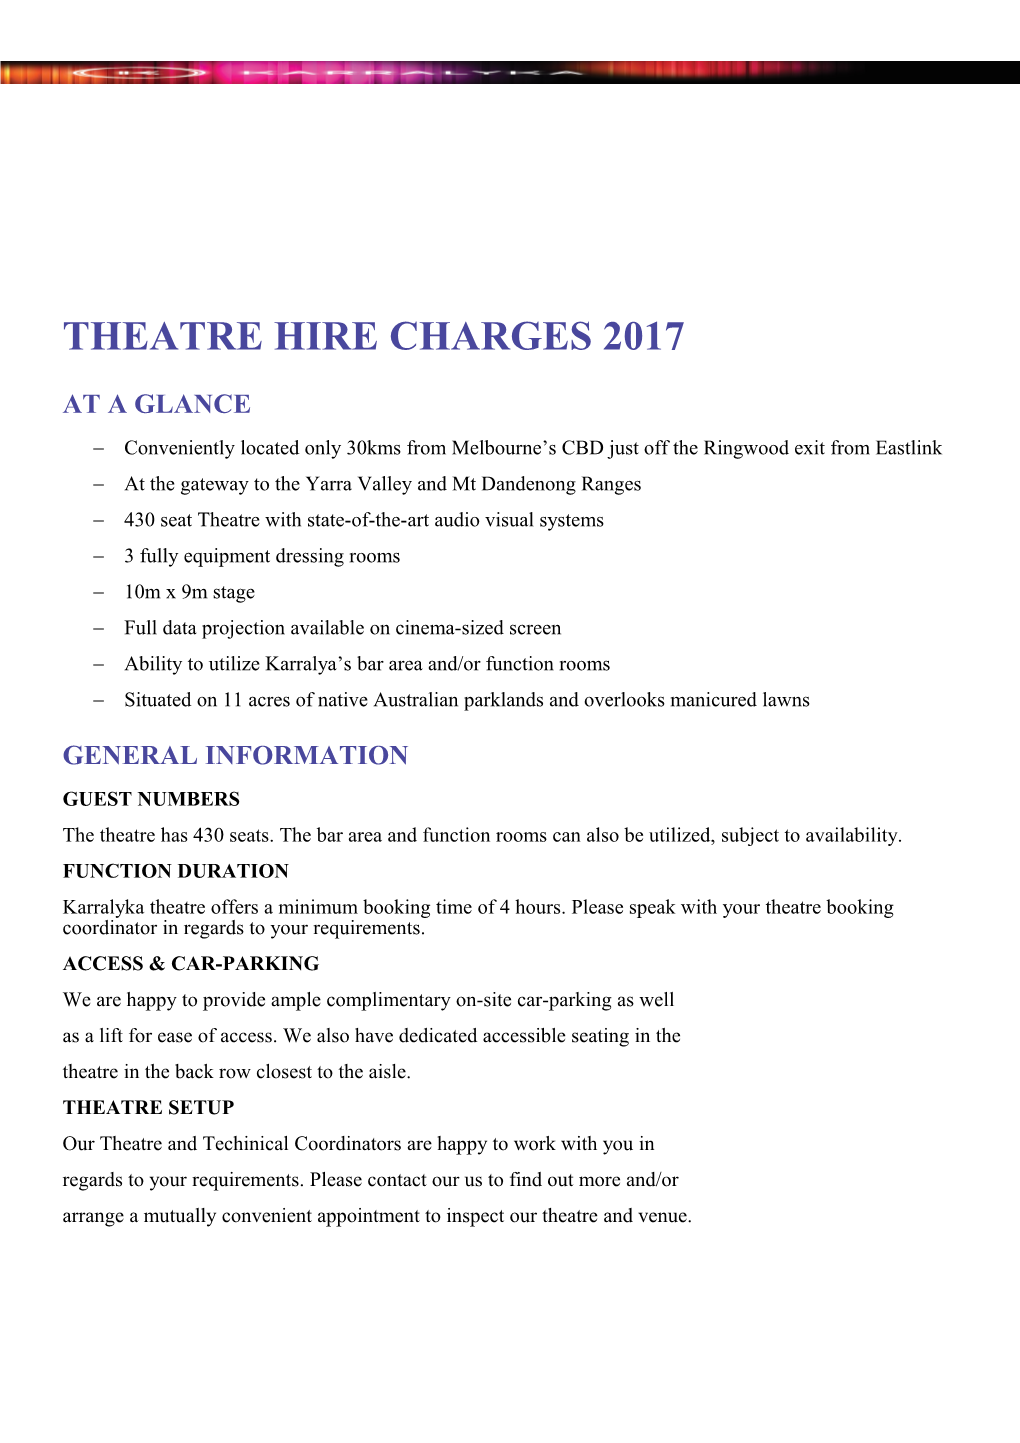 Theatre Hire Charges 2017